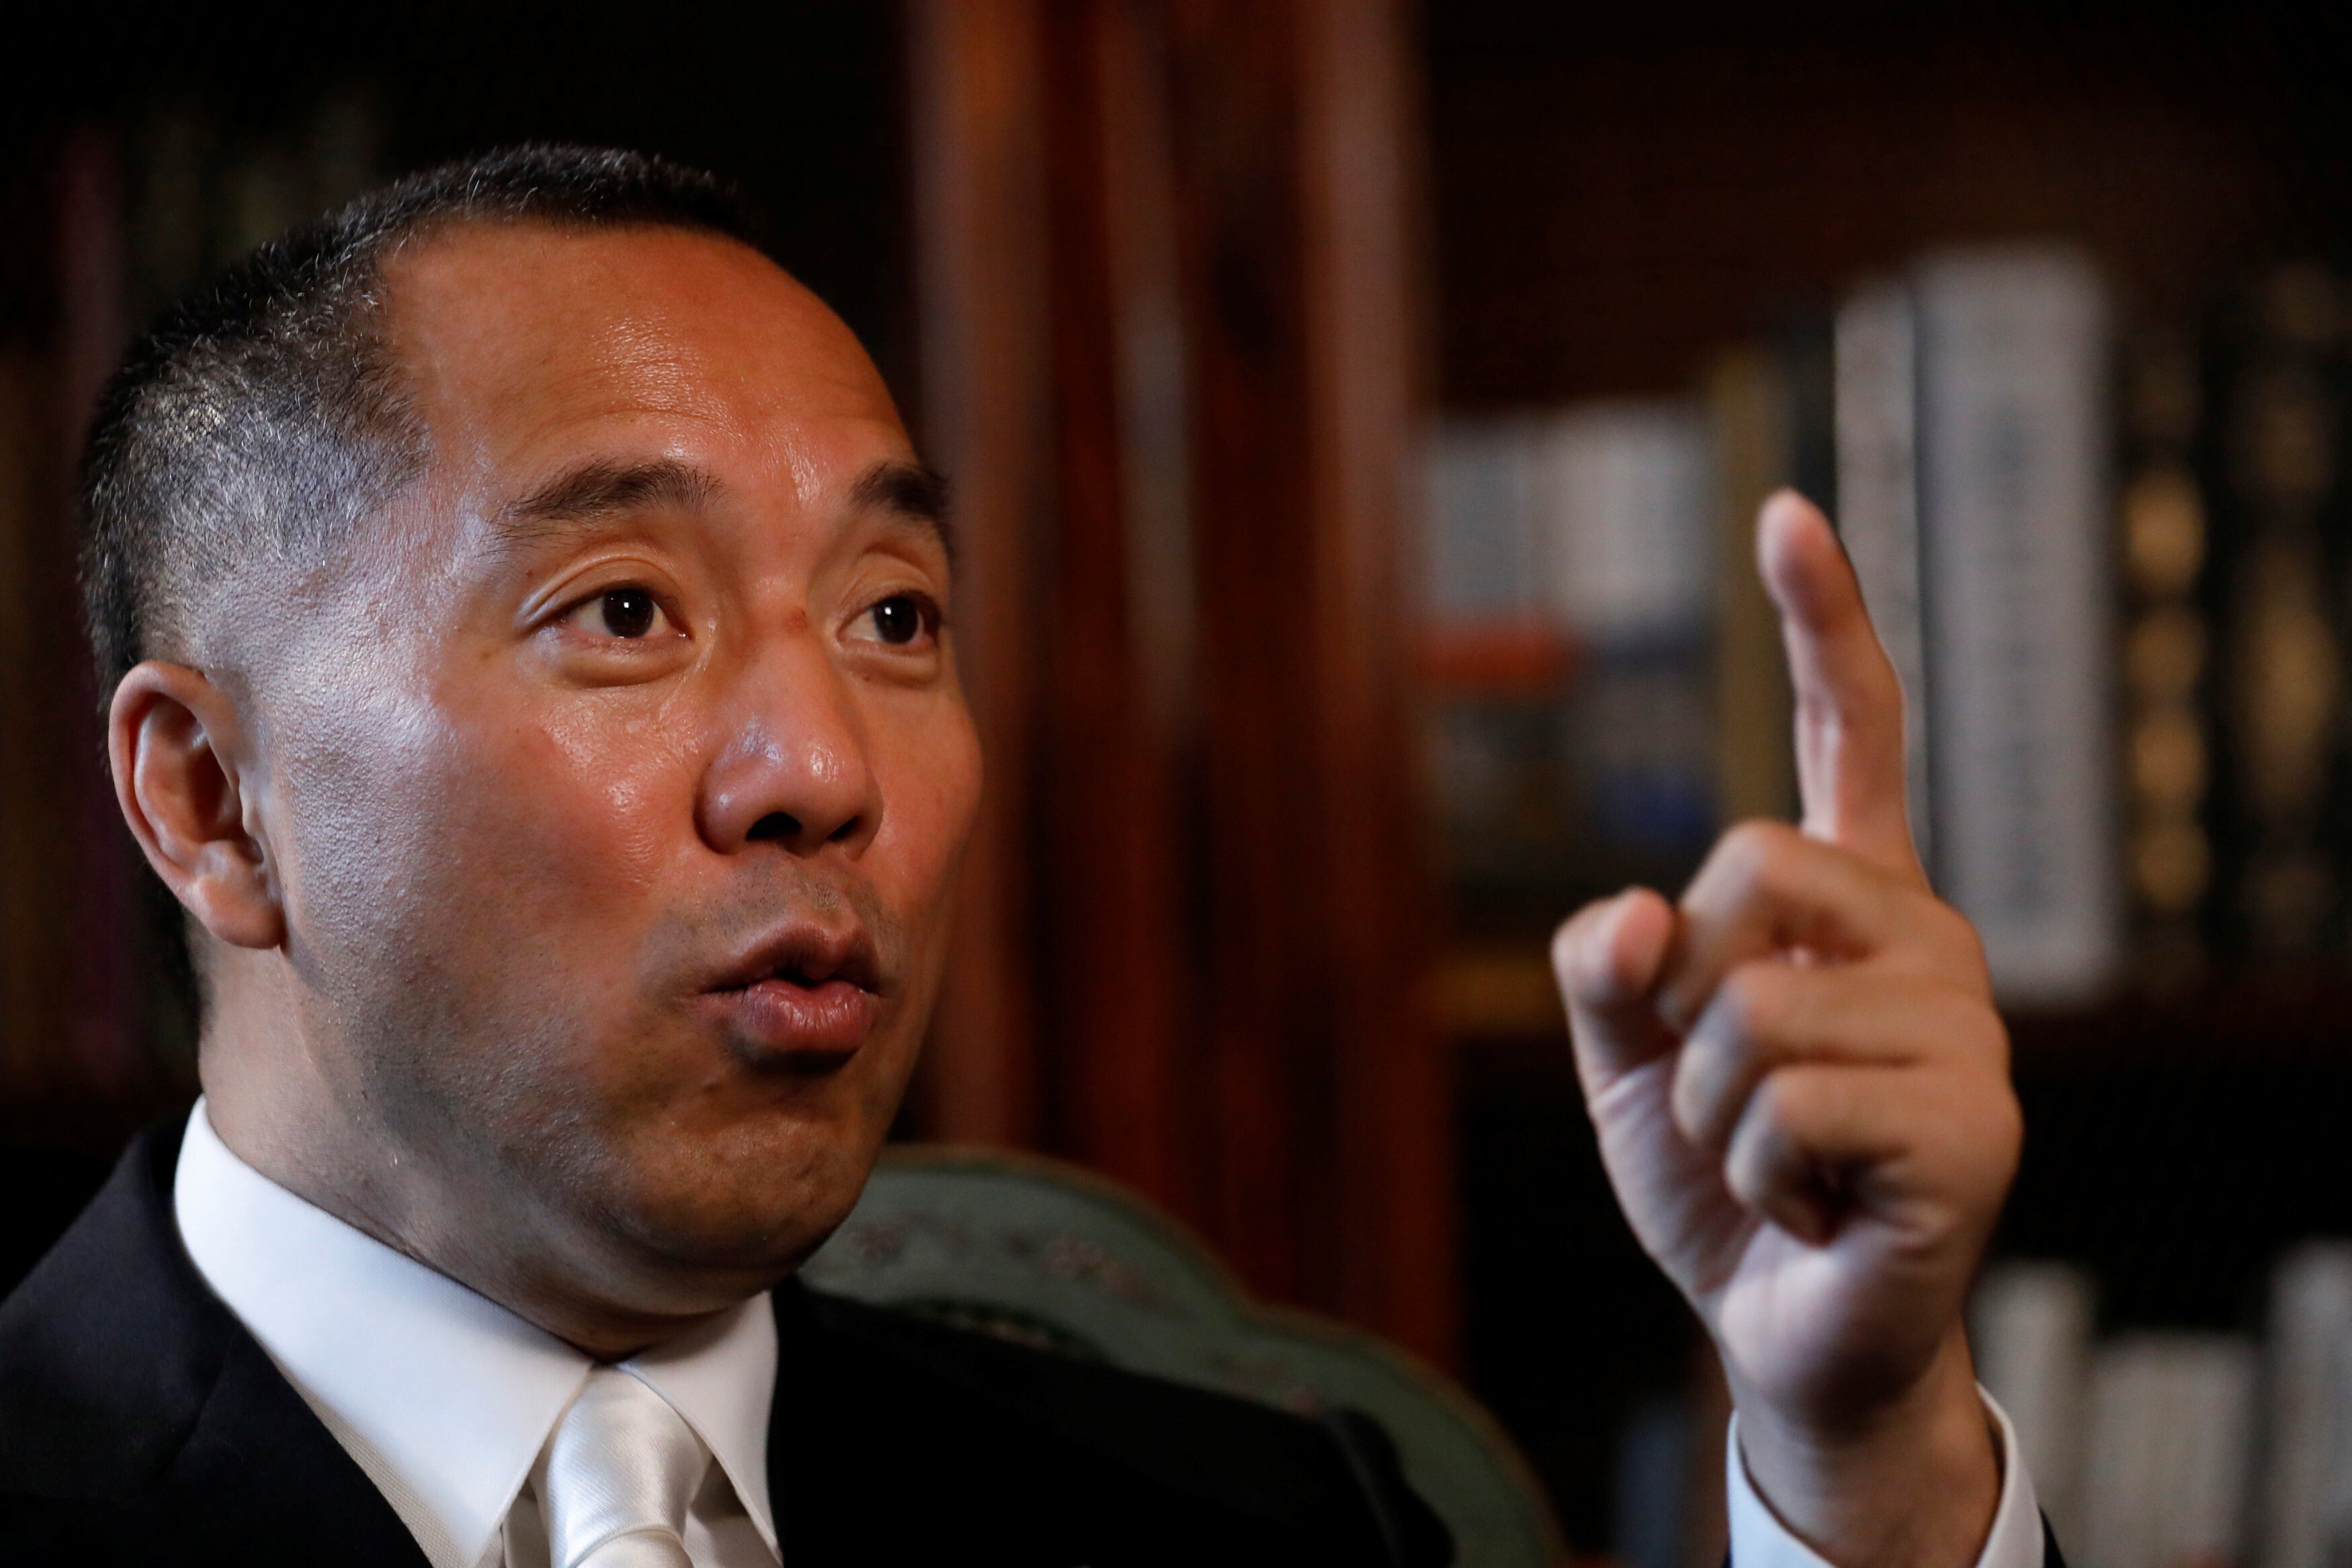 Fugitive real estate mogul Guo Wengui used social media and his media companies to disseminate searing accusations of corruption against China’s rich and powerful. Photo: Reuters